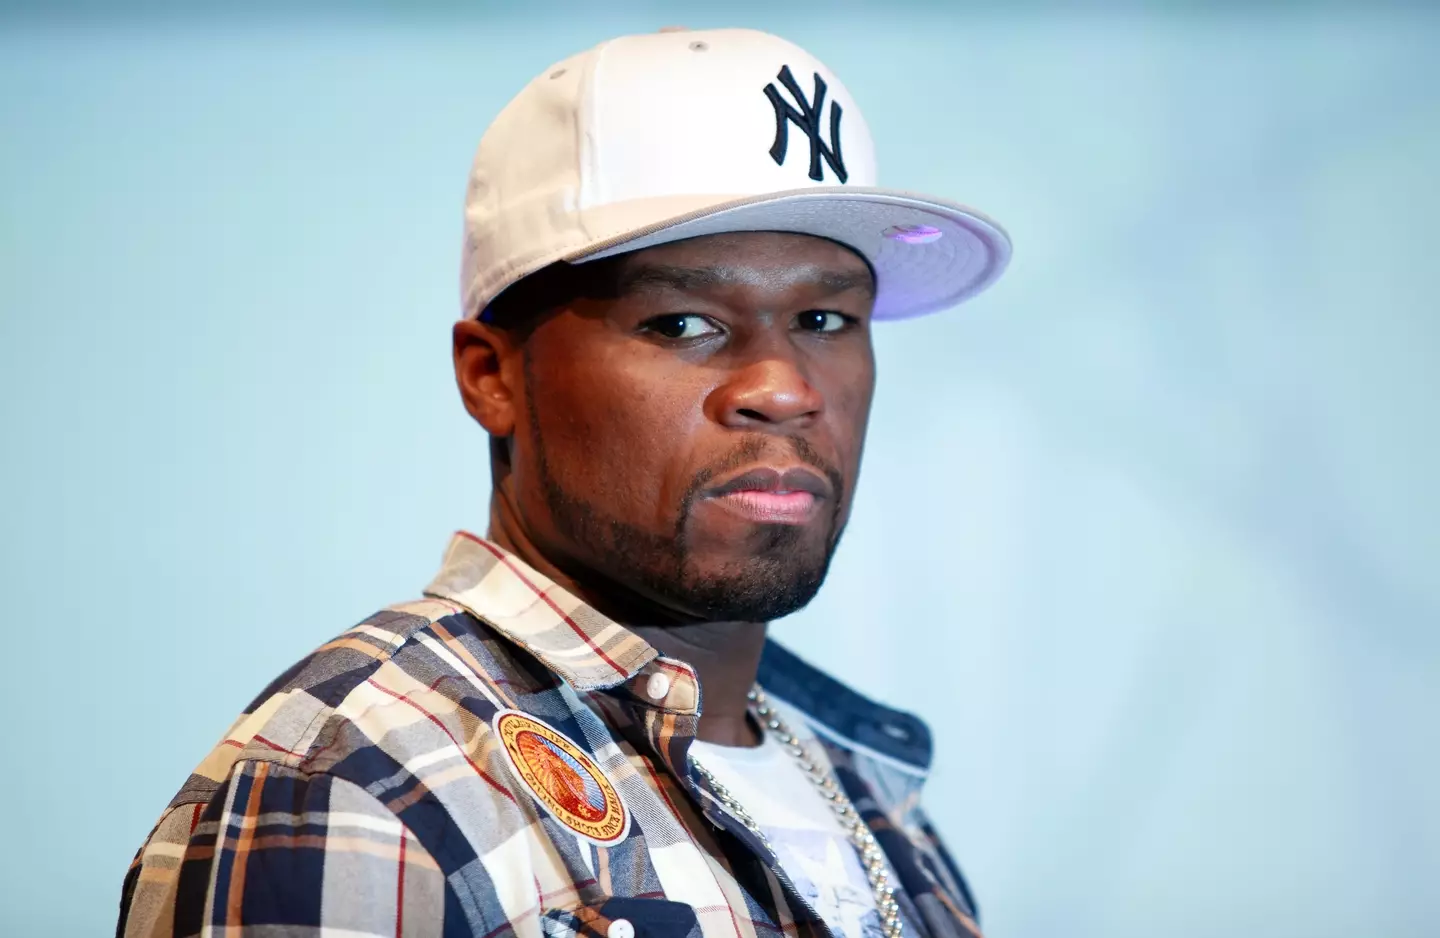 50 Cent appeared to reject his son's offer of spending the day together.